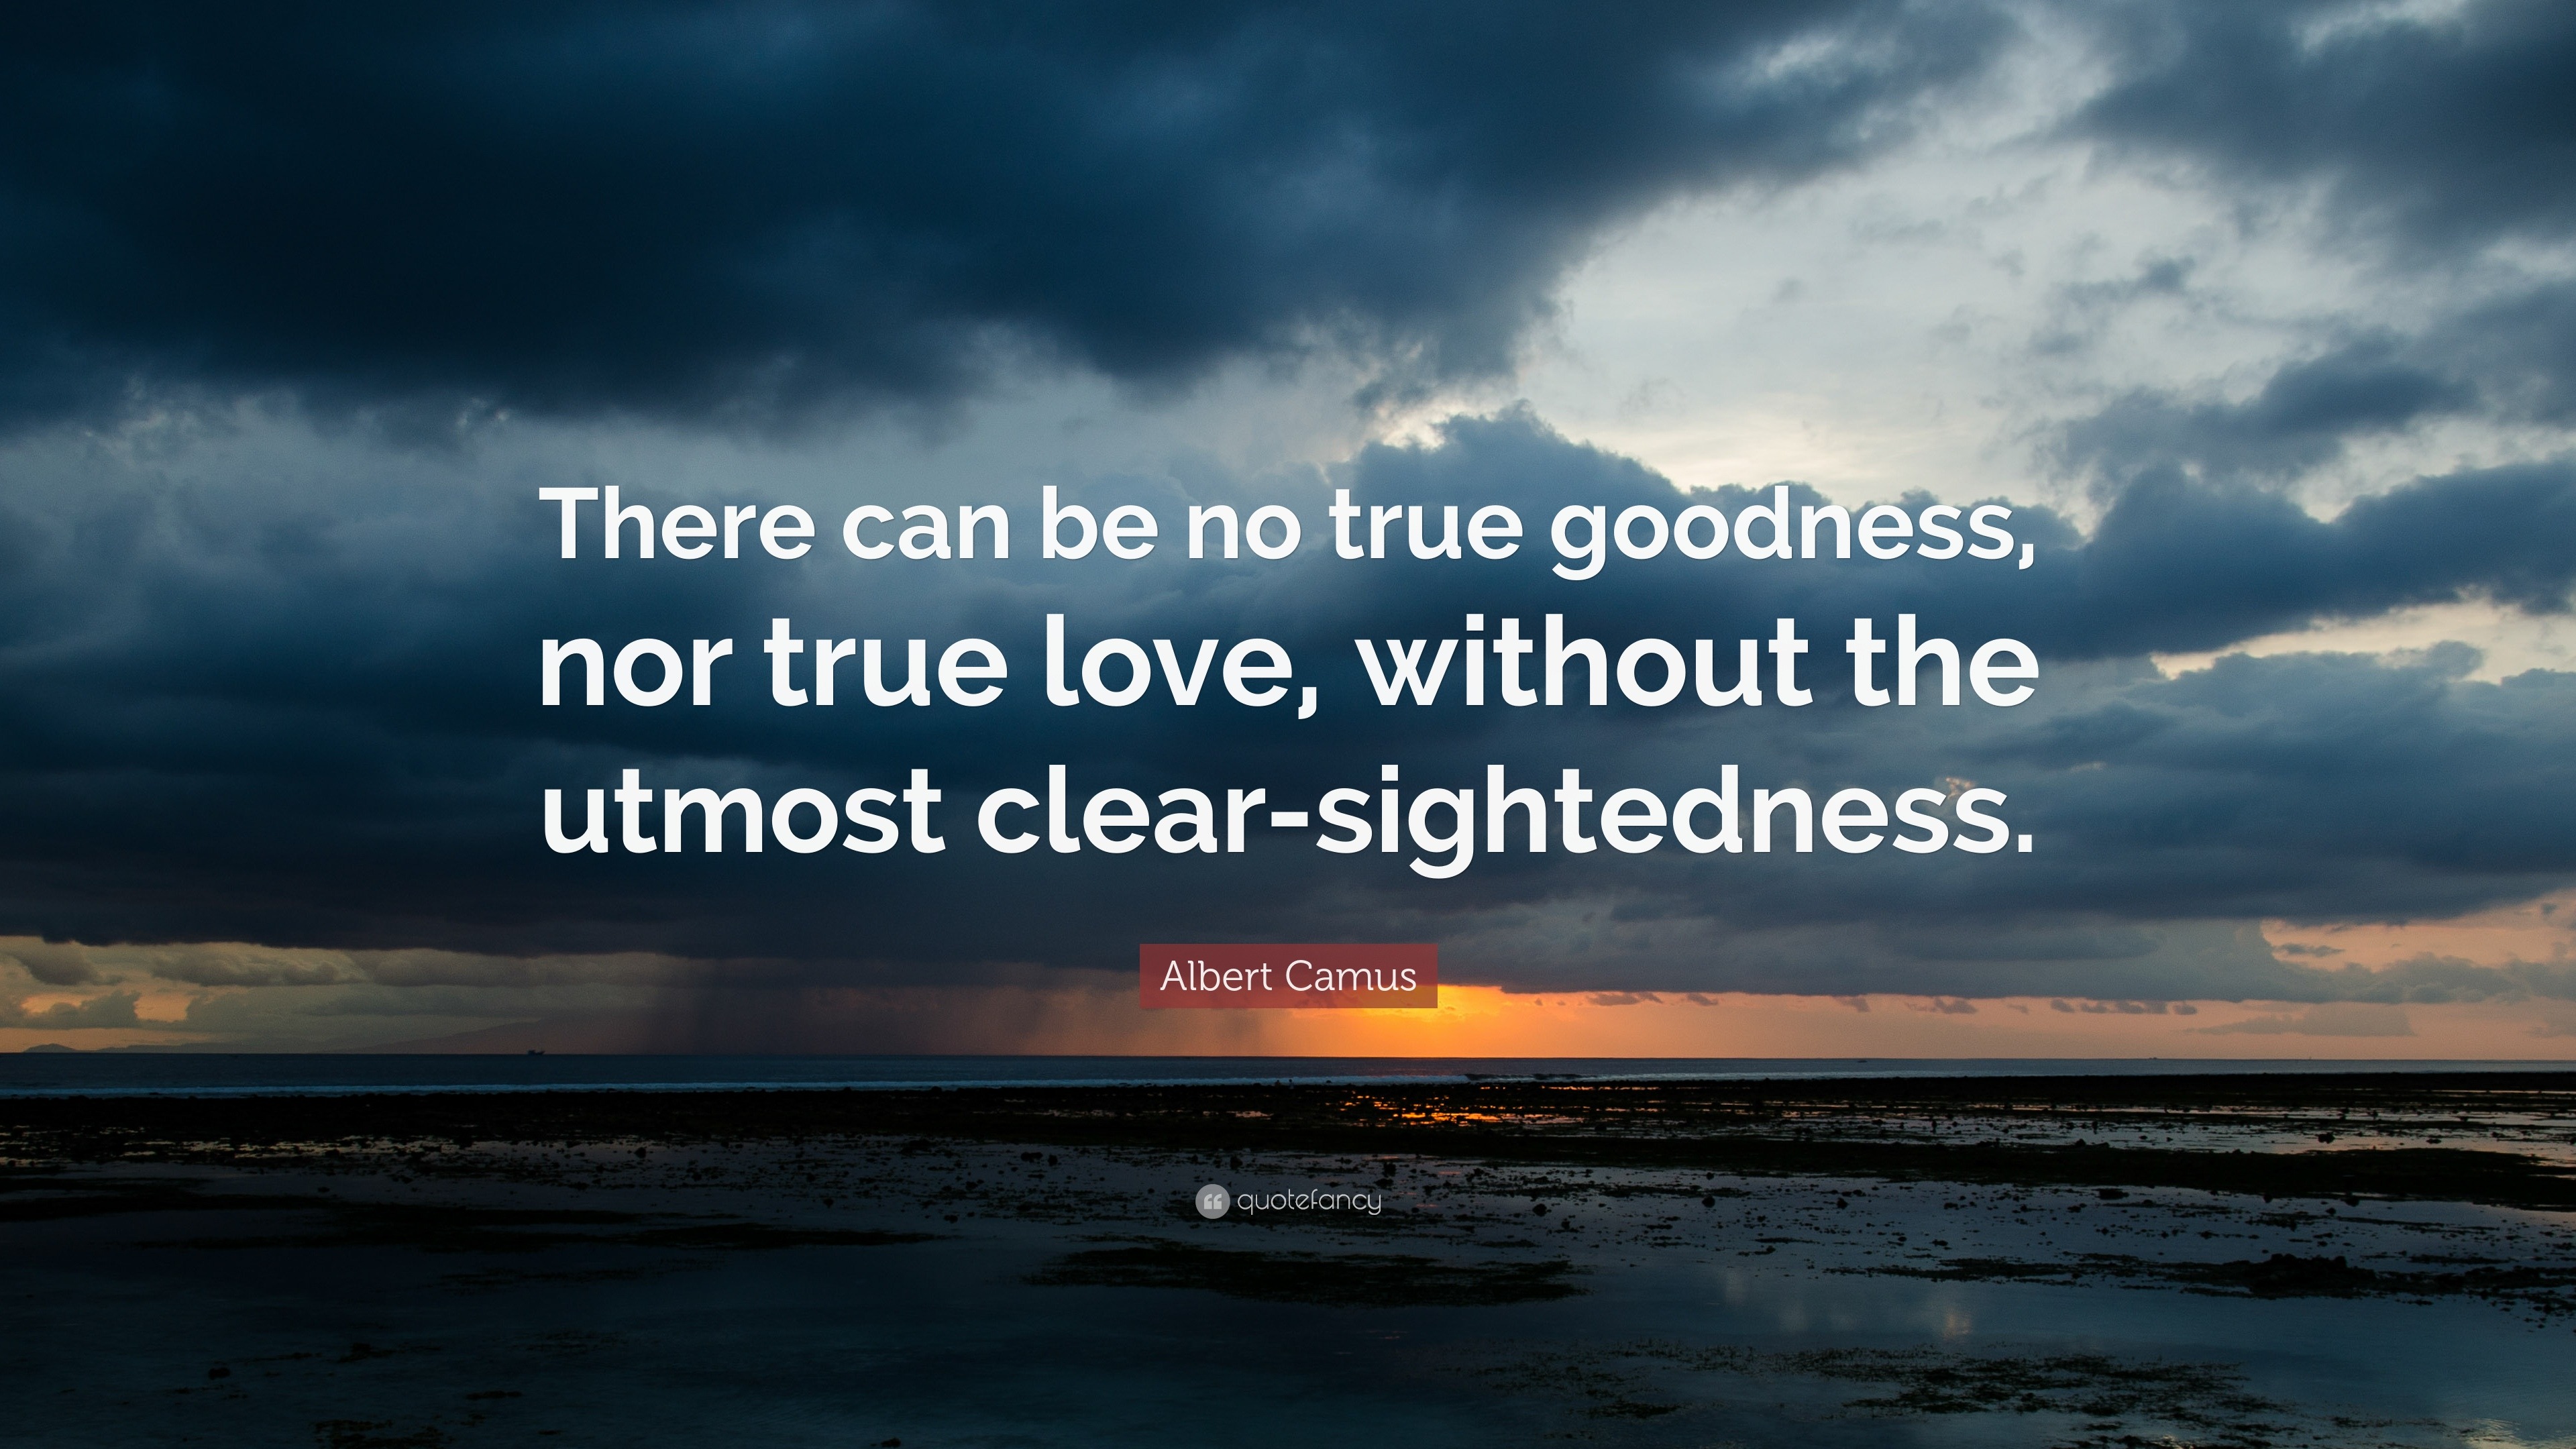 Albert Camus Quote “There can be no true goodness nor true love